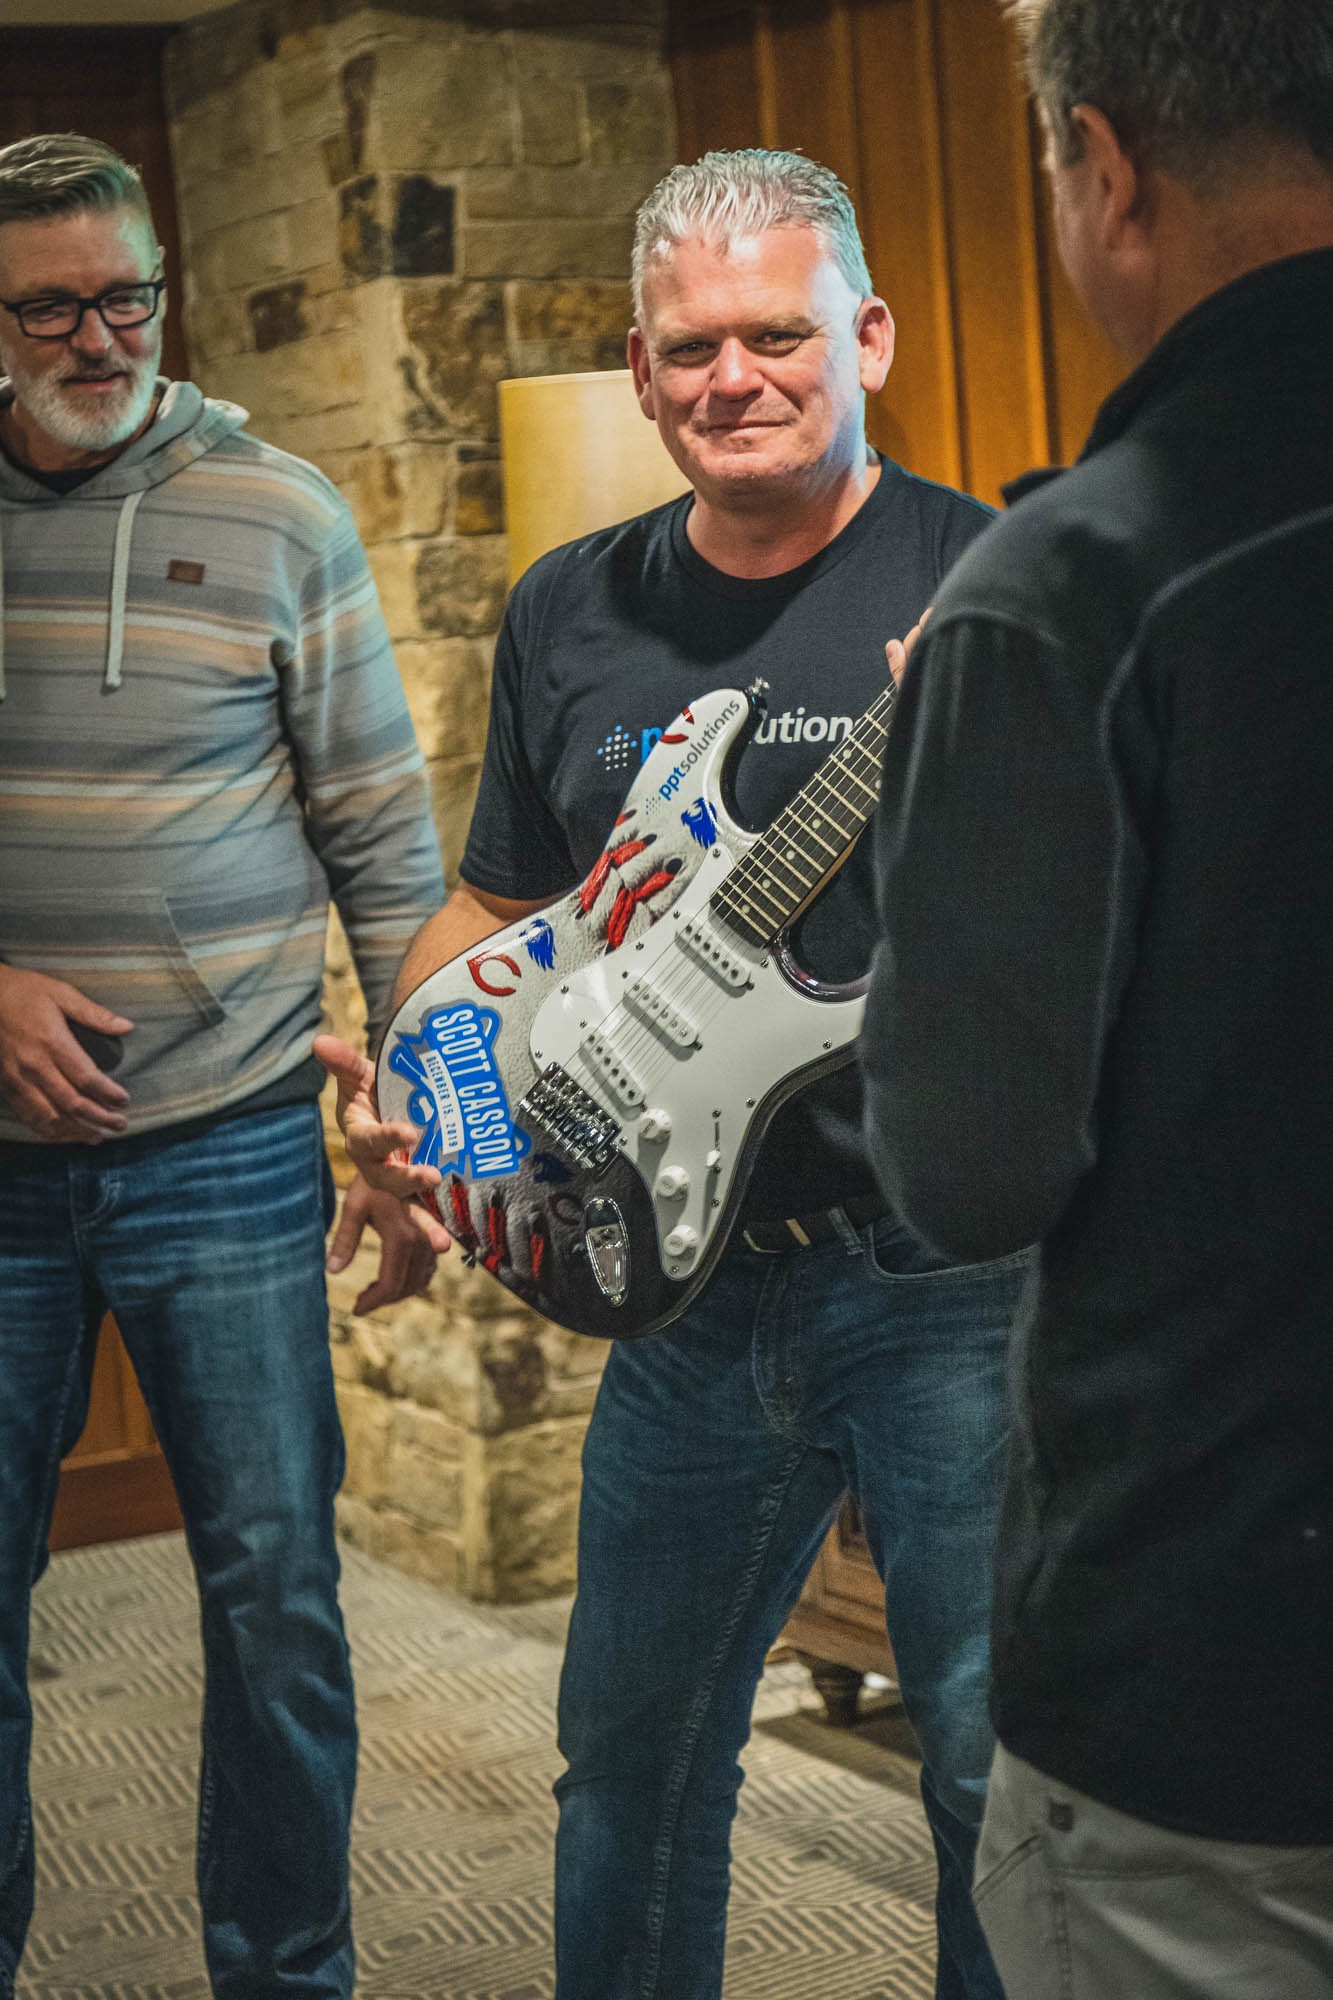 SVP of Delivery receives recognition (personalized guitar) for excellent individual and team performance